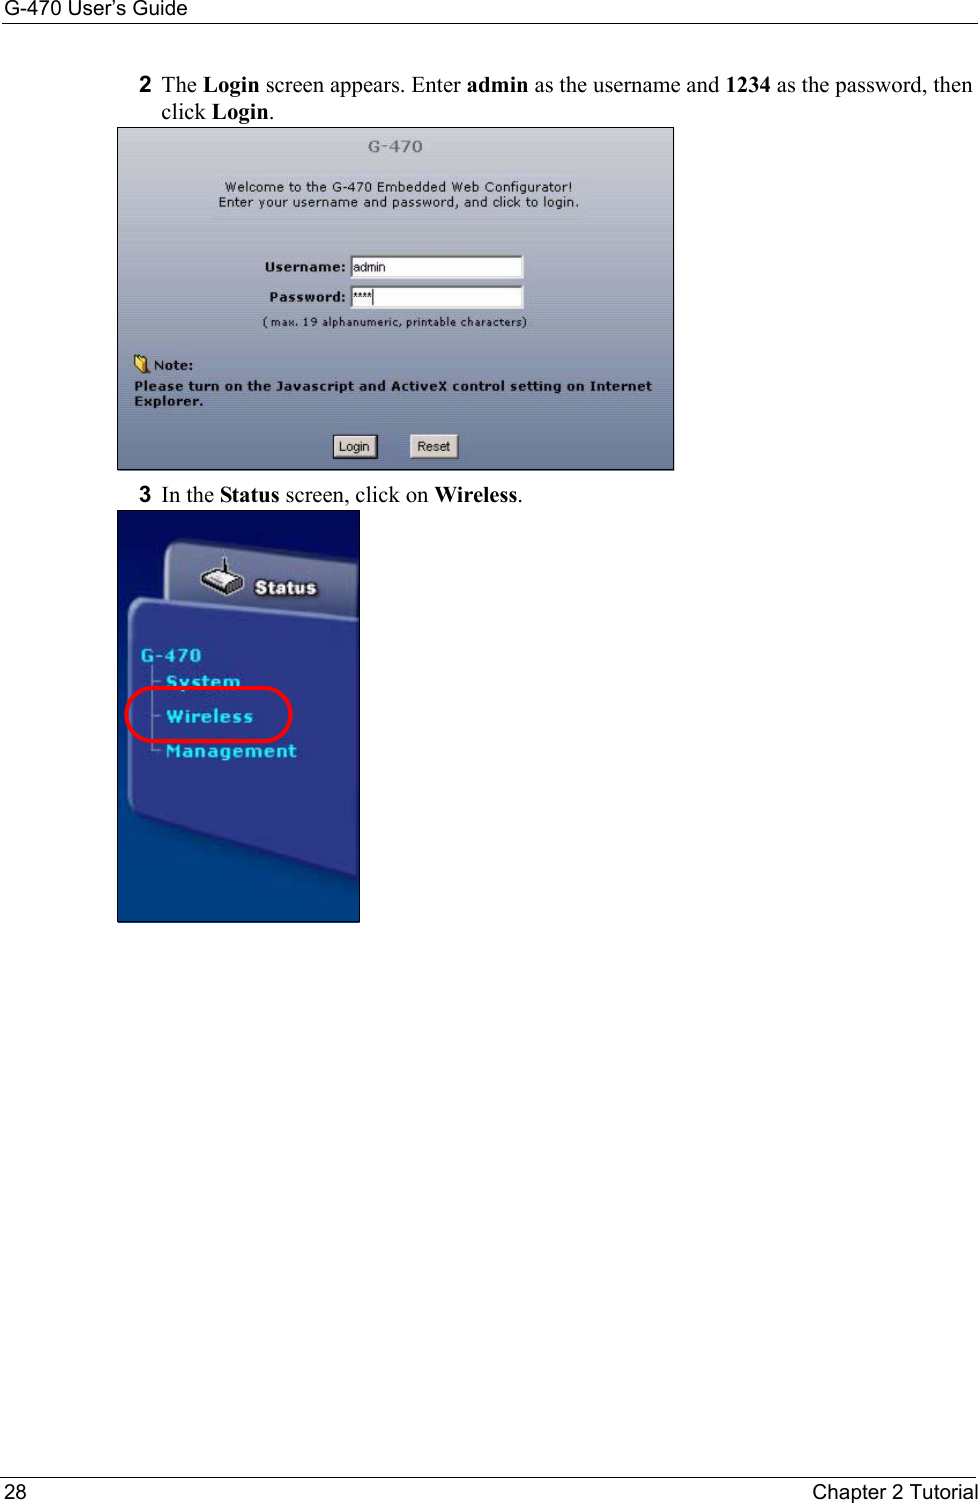 G-470 User’s Guide28 Chapter 2 Tutorial2The Login screen appears. Enter admin as the username and 1234 as the password, then click Login.3In the Status screen, click on Wireless. 